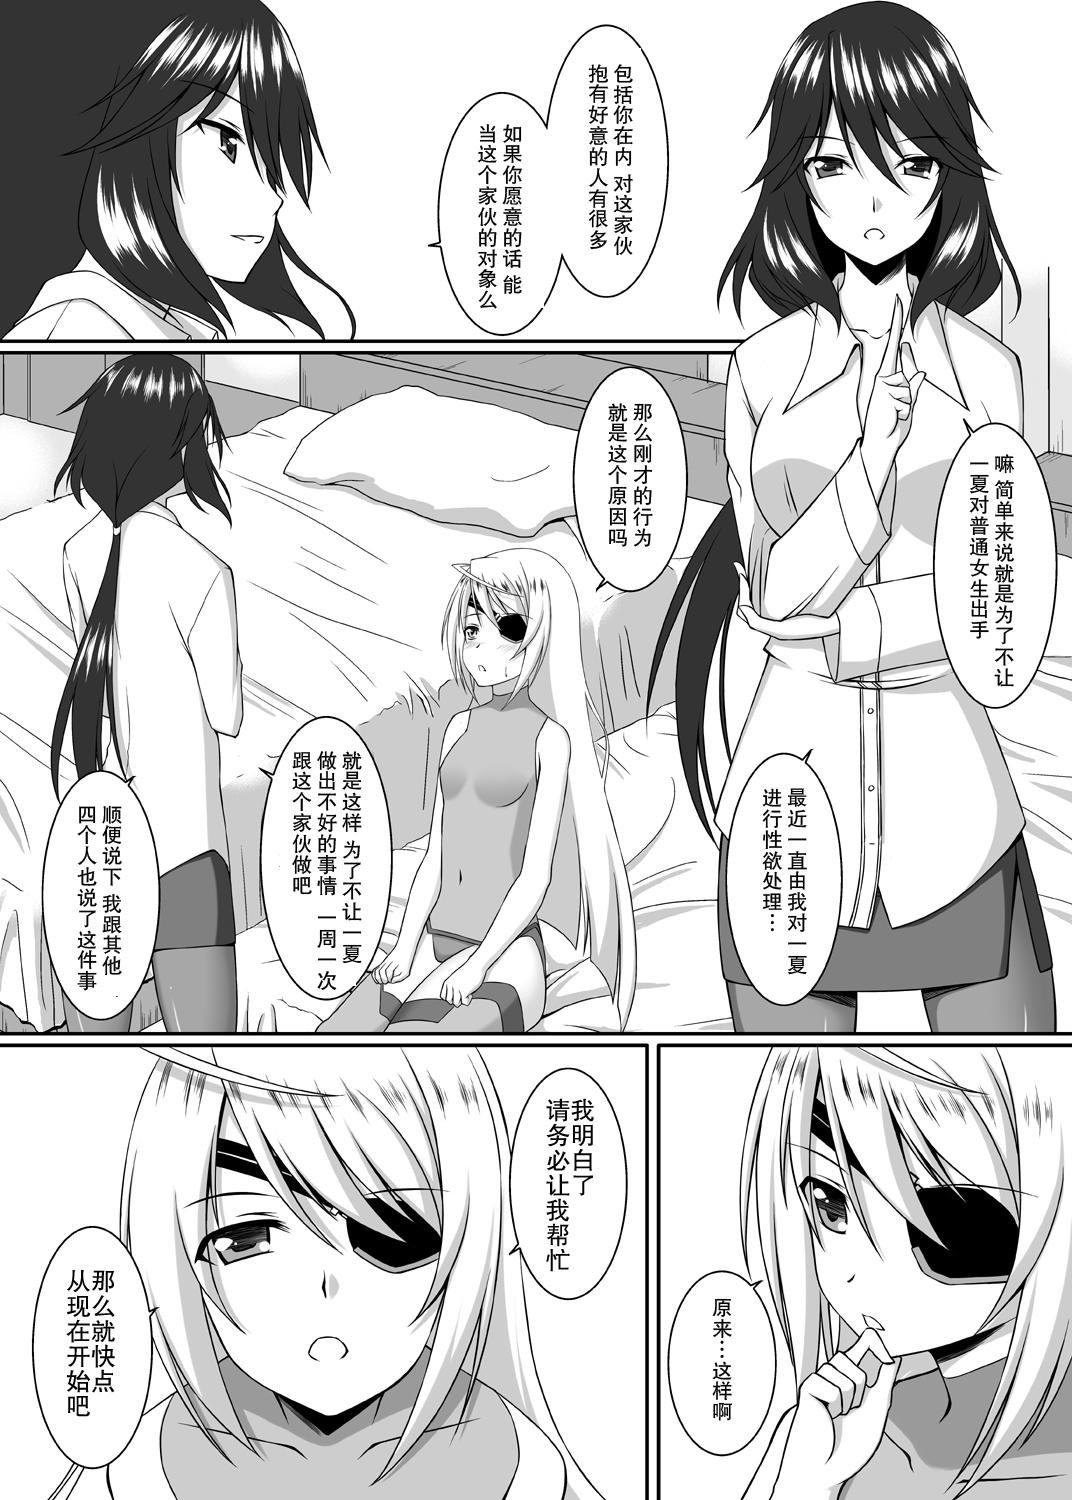 Long Hair Snow Thaw - Infinite stratos Rola - Page 10